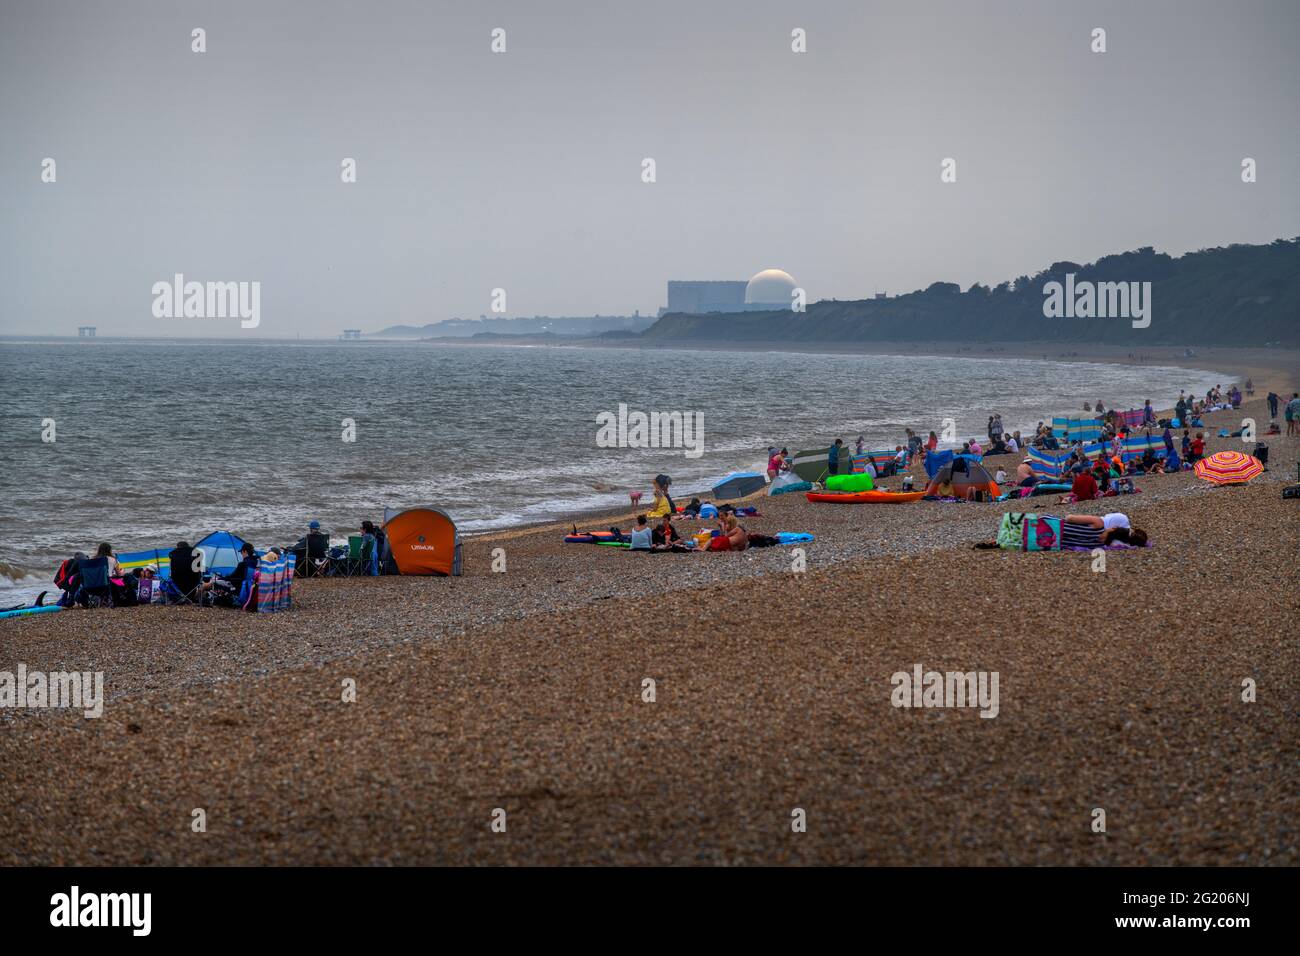 Dunwich Beach looking to Sizewell Nulear Power Station June 2021 Stock Photo